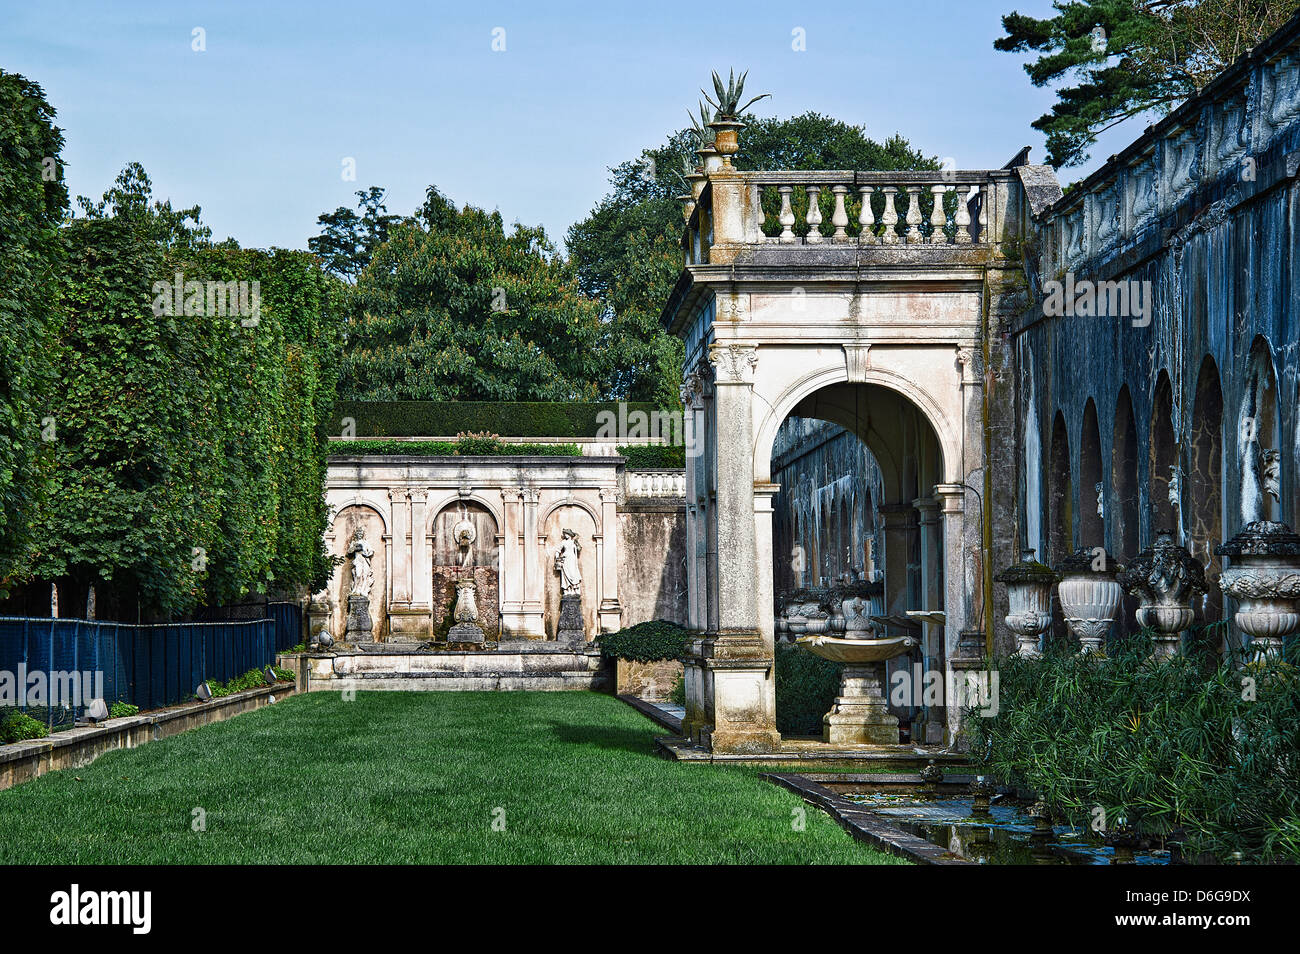 Jardin Fontaine, Longwood Gardens, New Jersey, USA Banque D'Images